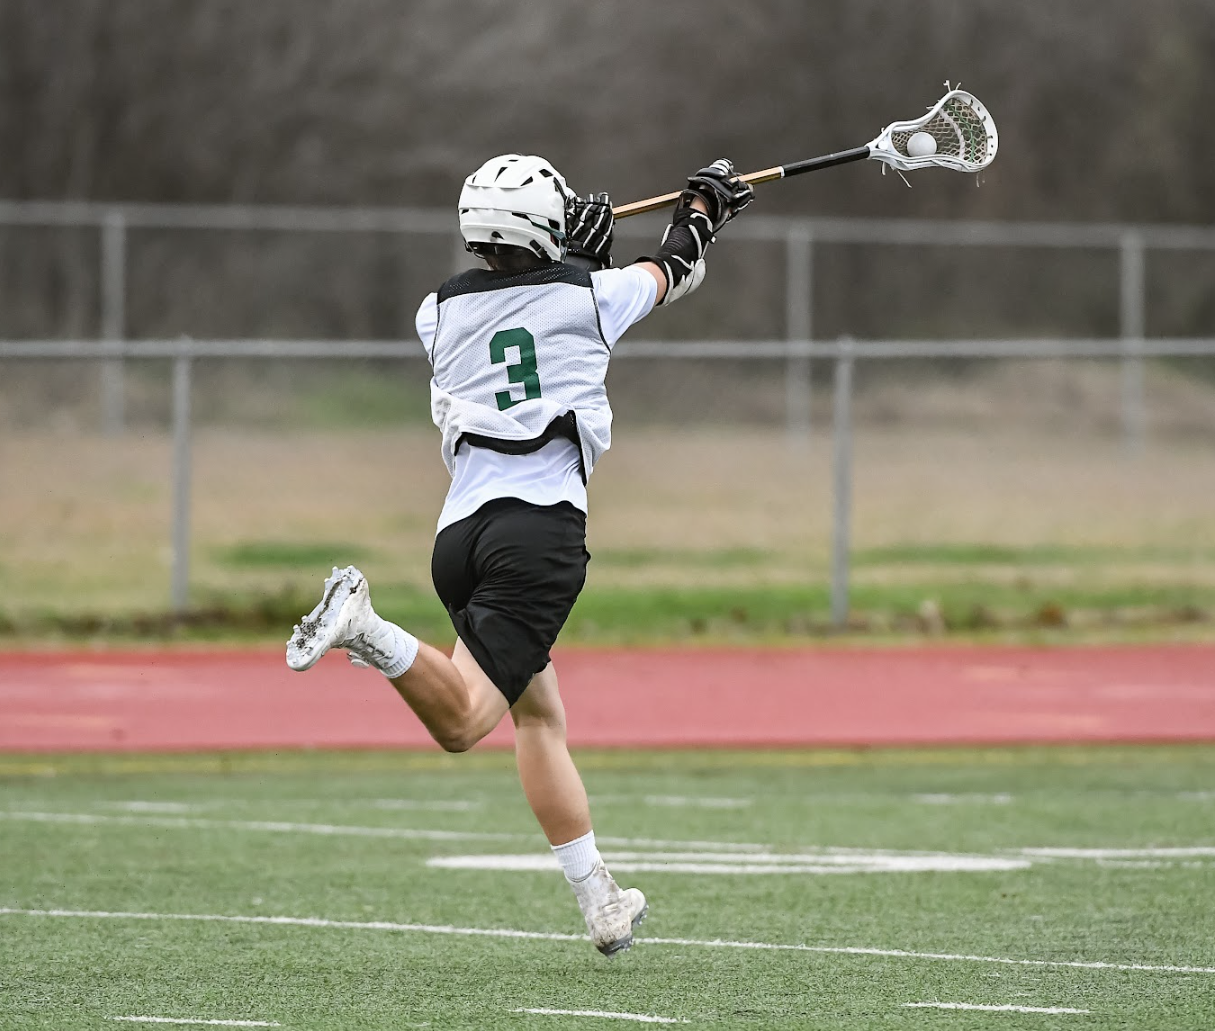 A person playing lacrosse